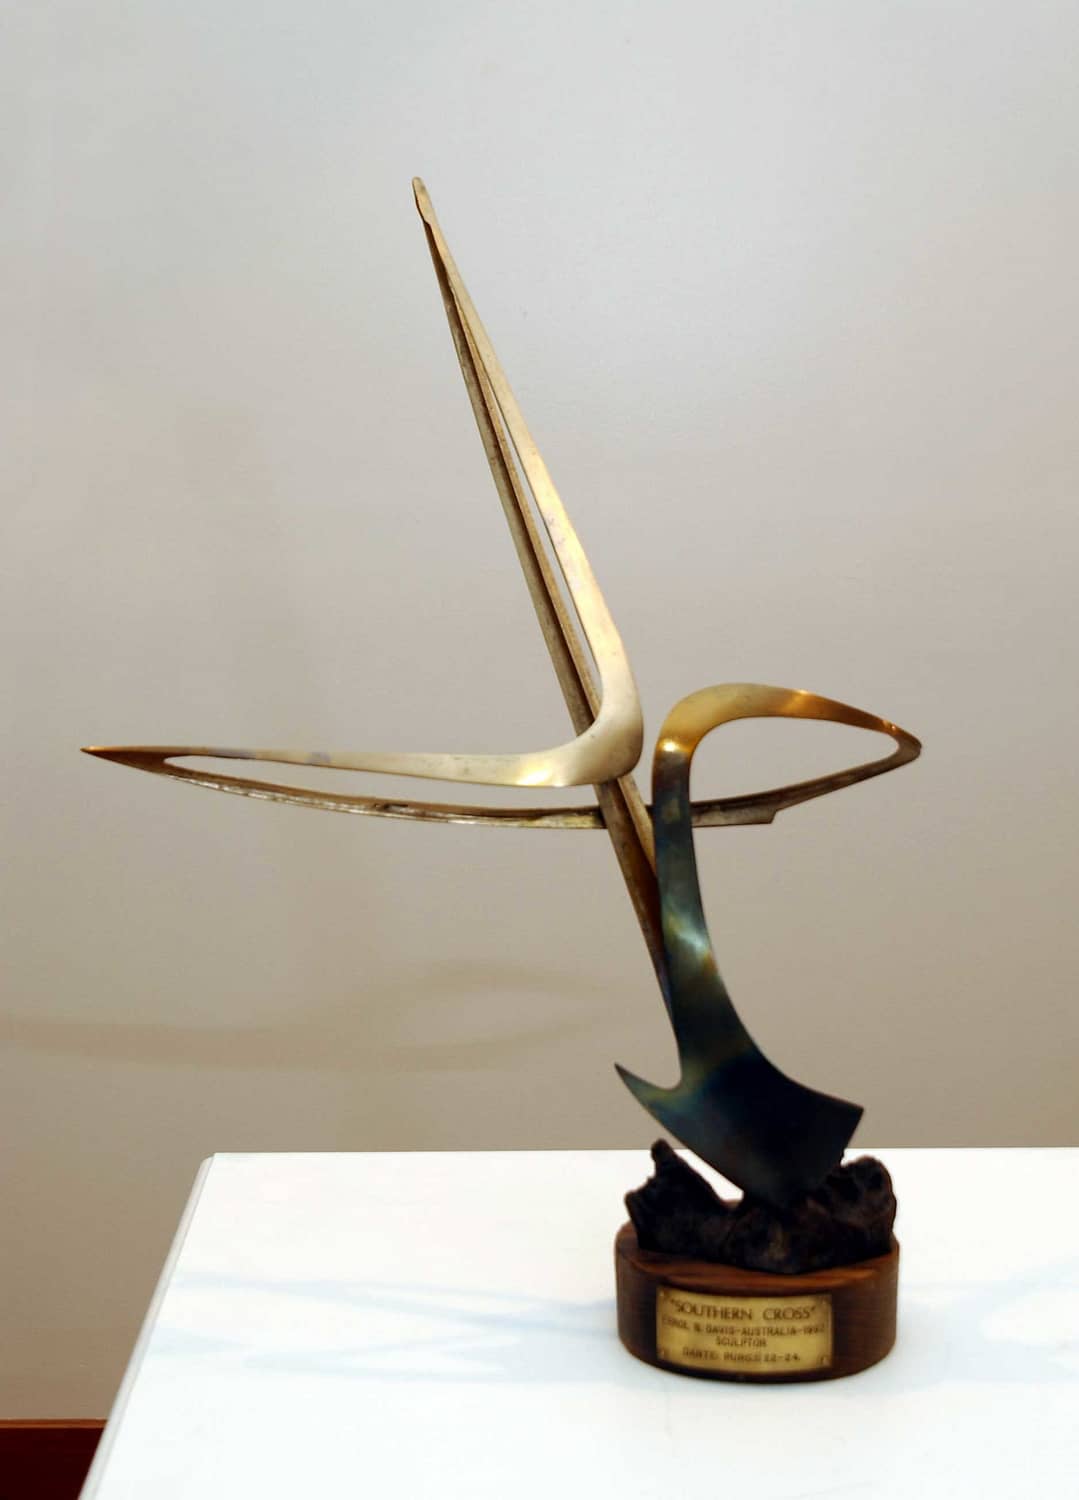 Southern Cross series, maquette IV, bronze, 1992